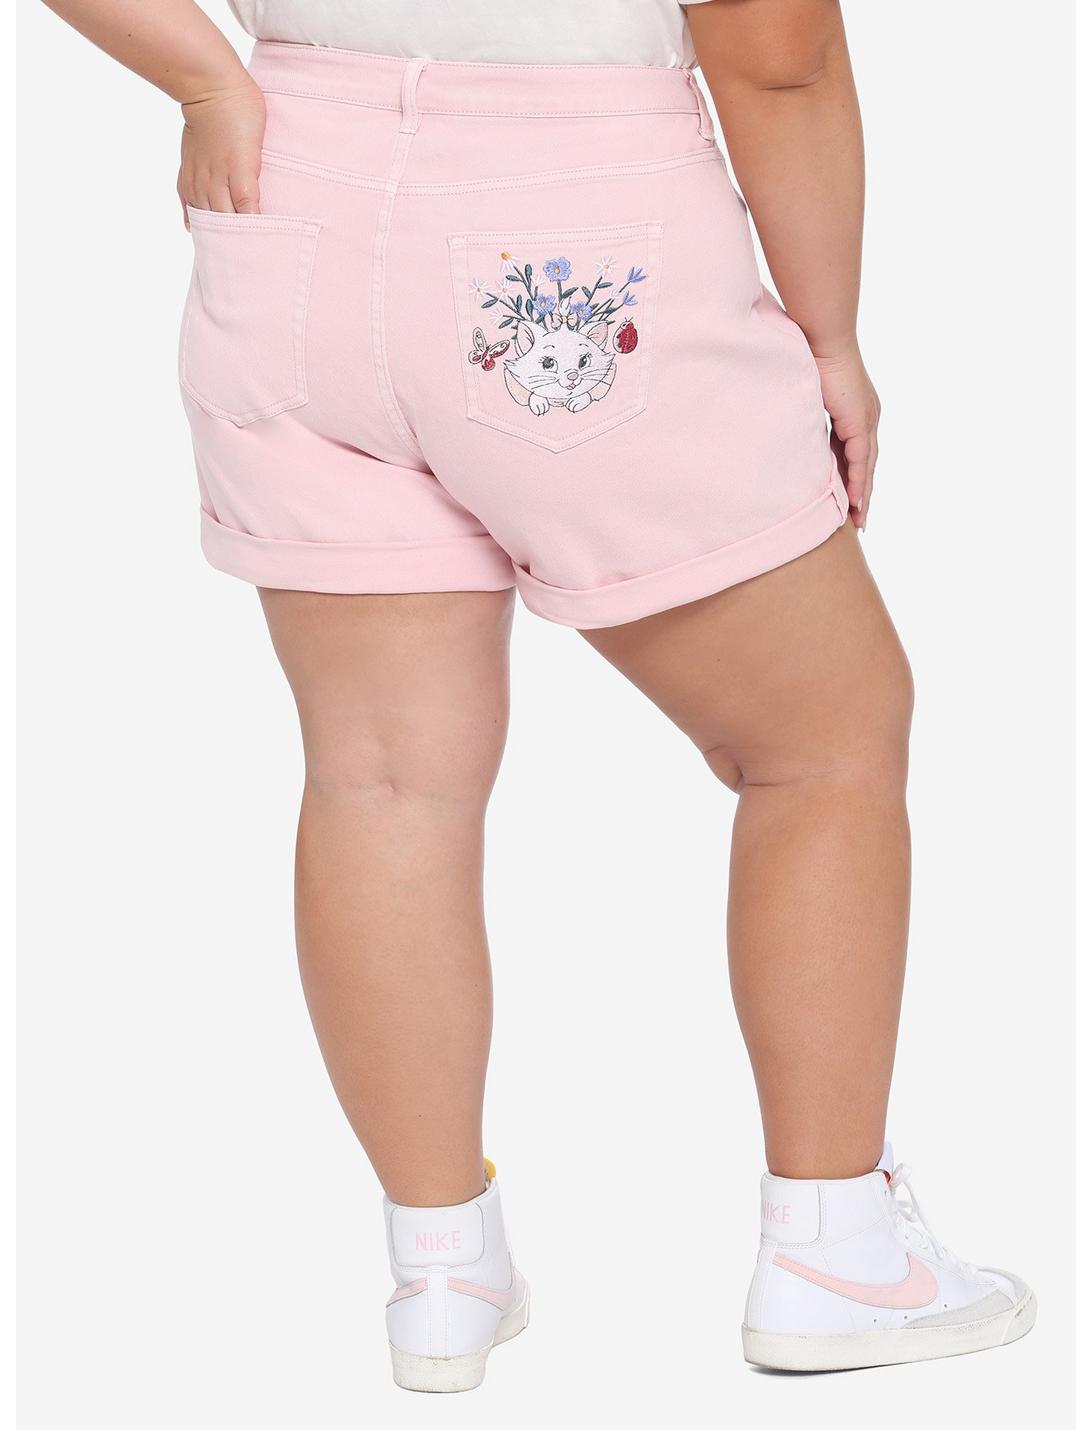 Disney The Aristocats Marie Floral Embroidered High-Waisted Denim Shorts Plus Size, MULTI, hi-res